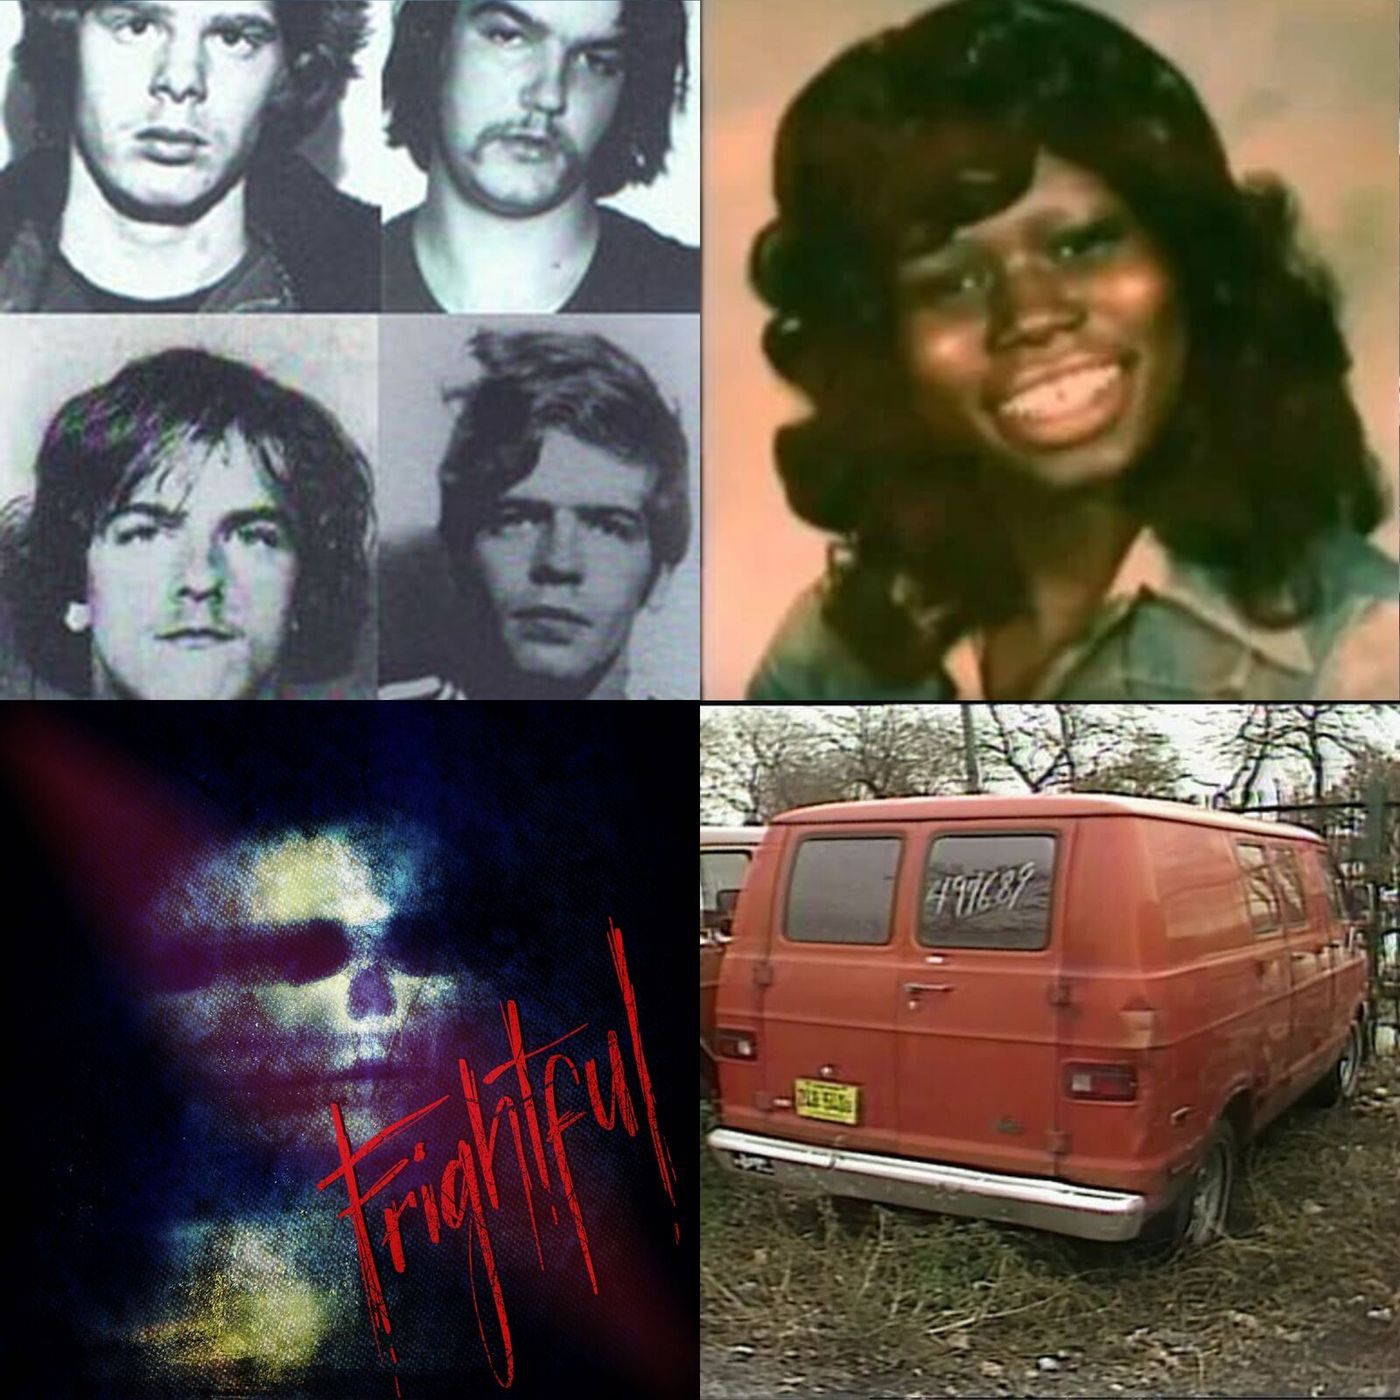 42: The Chicago Ripper Crew, Part 1